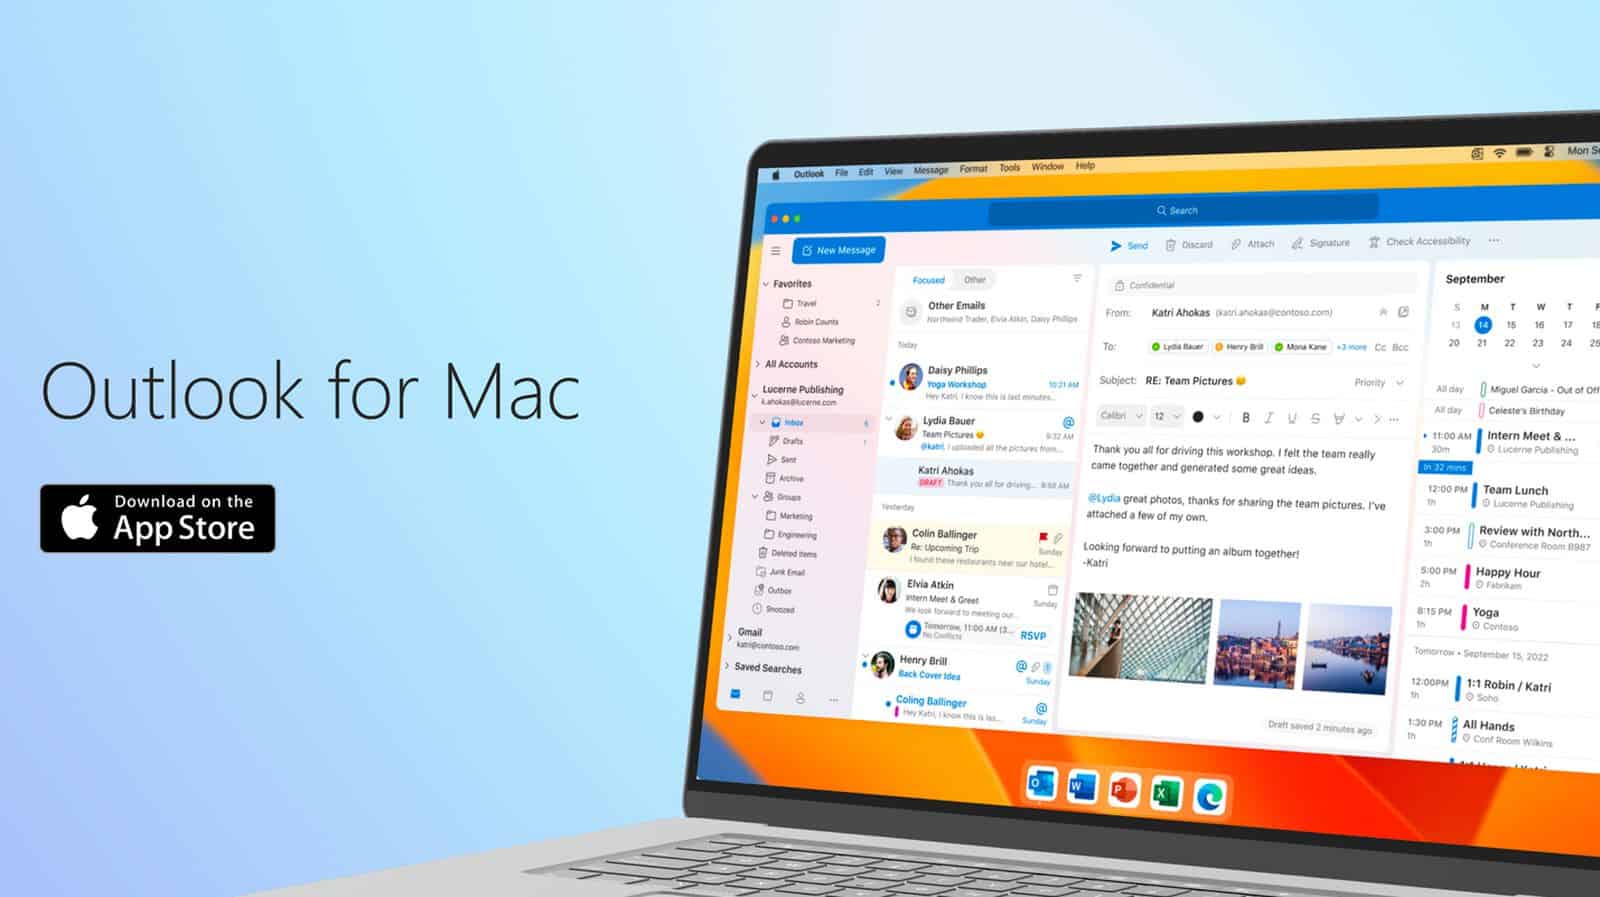 Microsoft Outlook for Mac is now free.